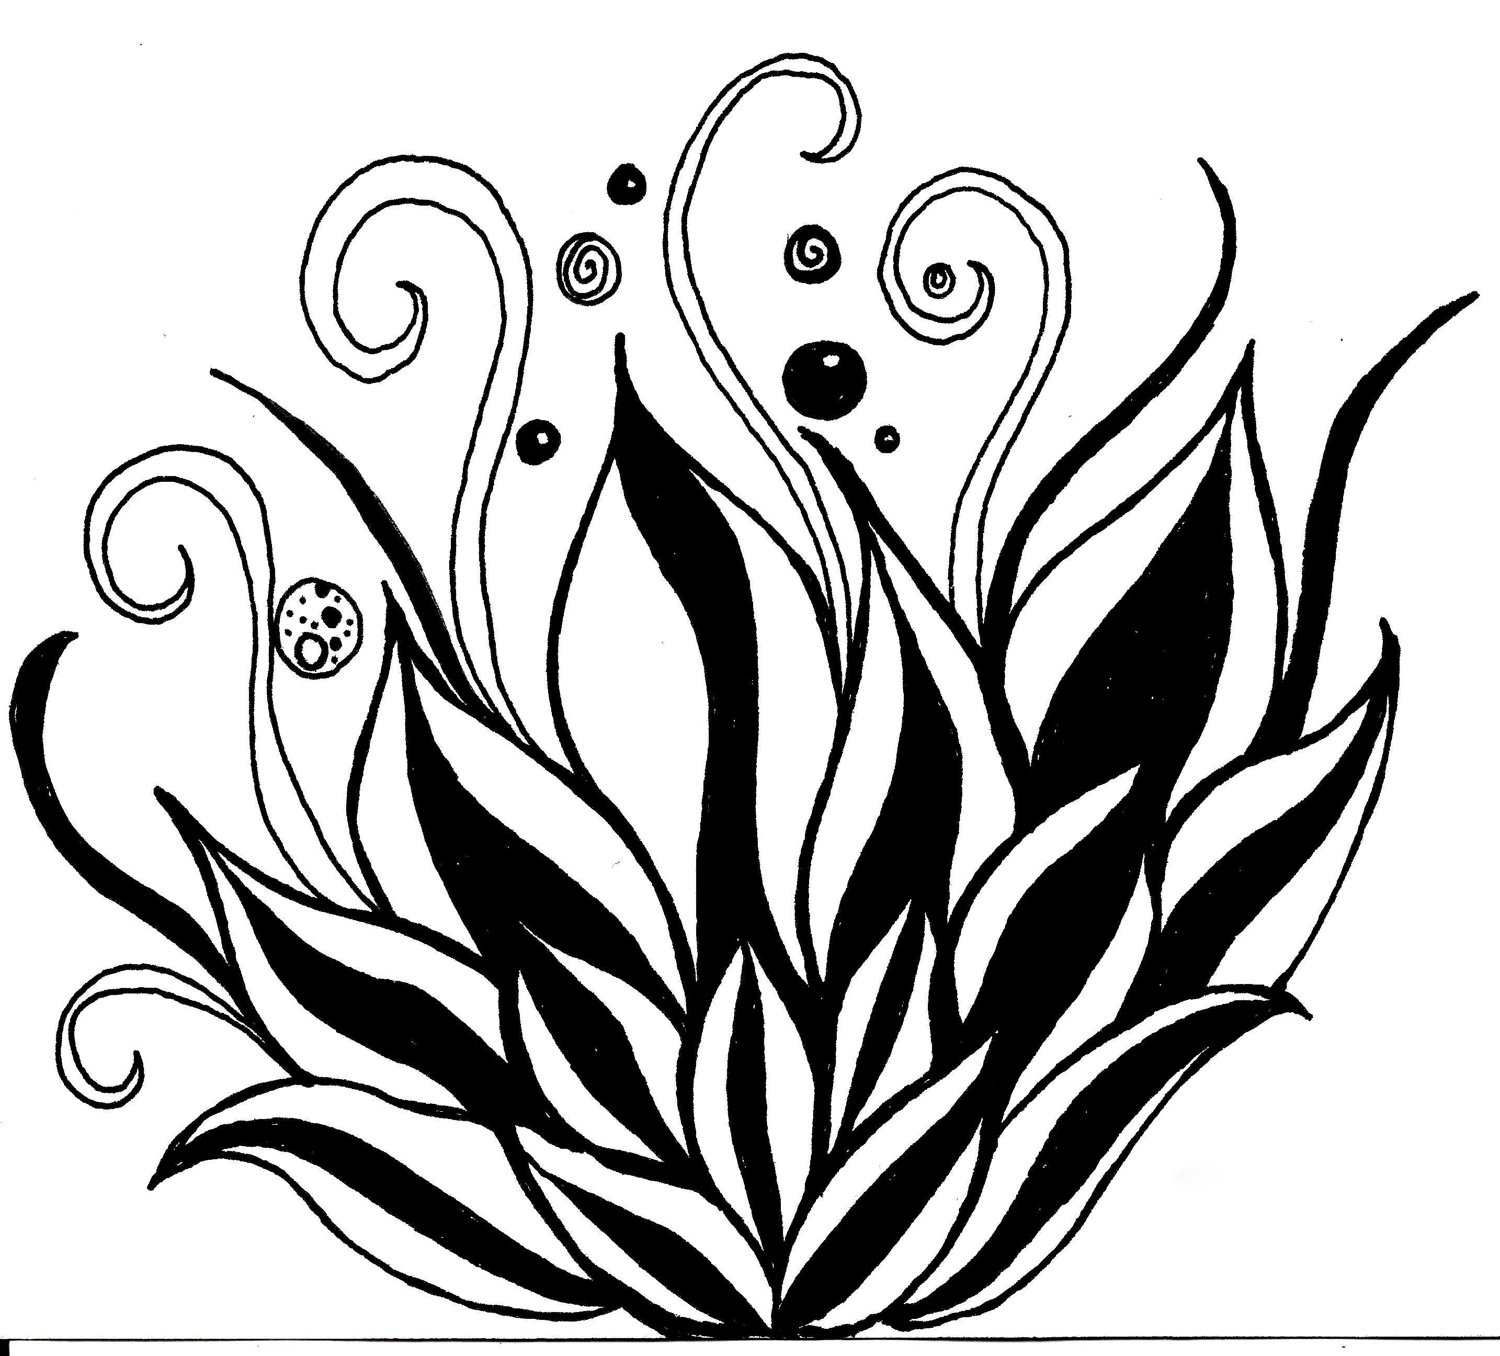 Black Background With White Flower Drawings Stock Photos Images ...